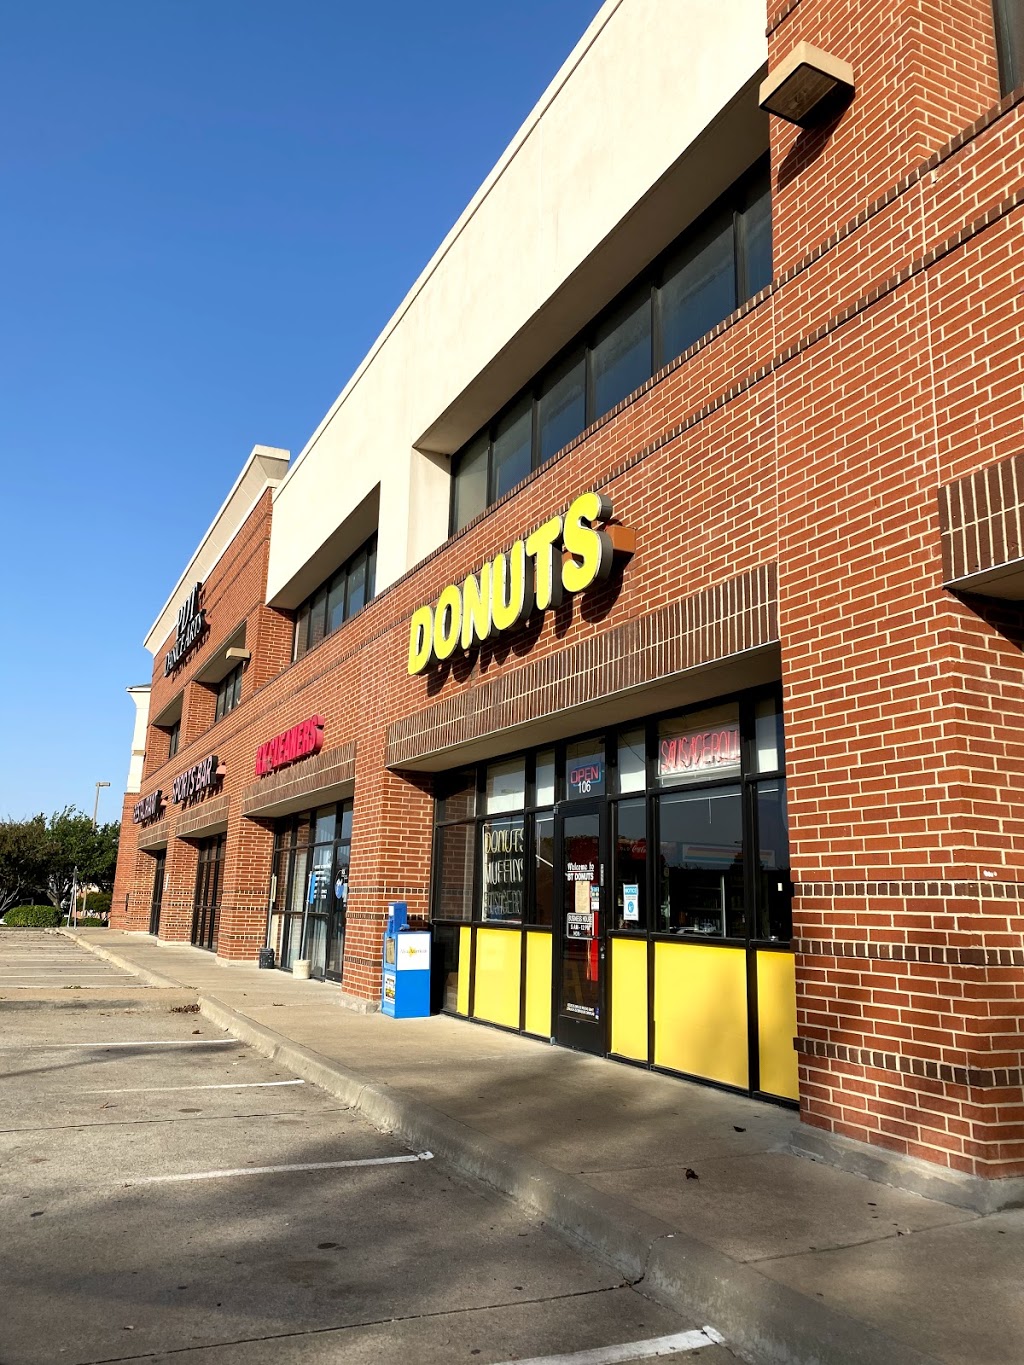 B T Donuts | 604 W Bethany Dr, Allen, TX 75013, USA | Phone: (972) 396-8118